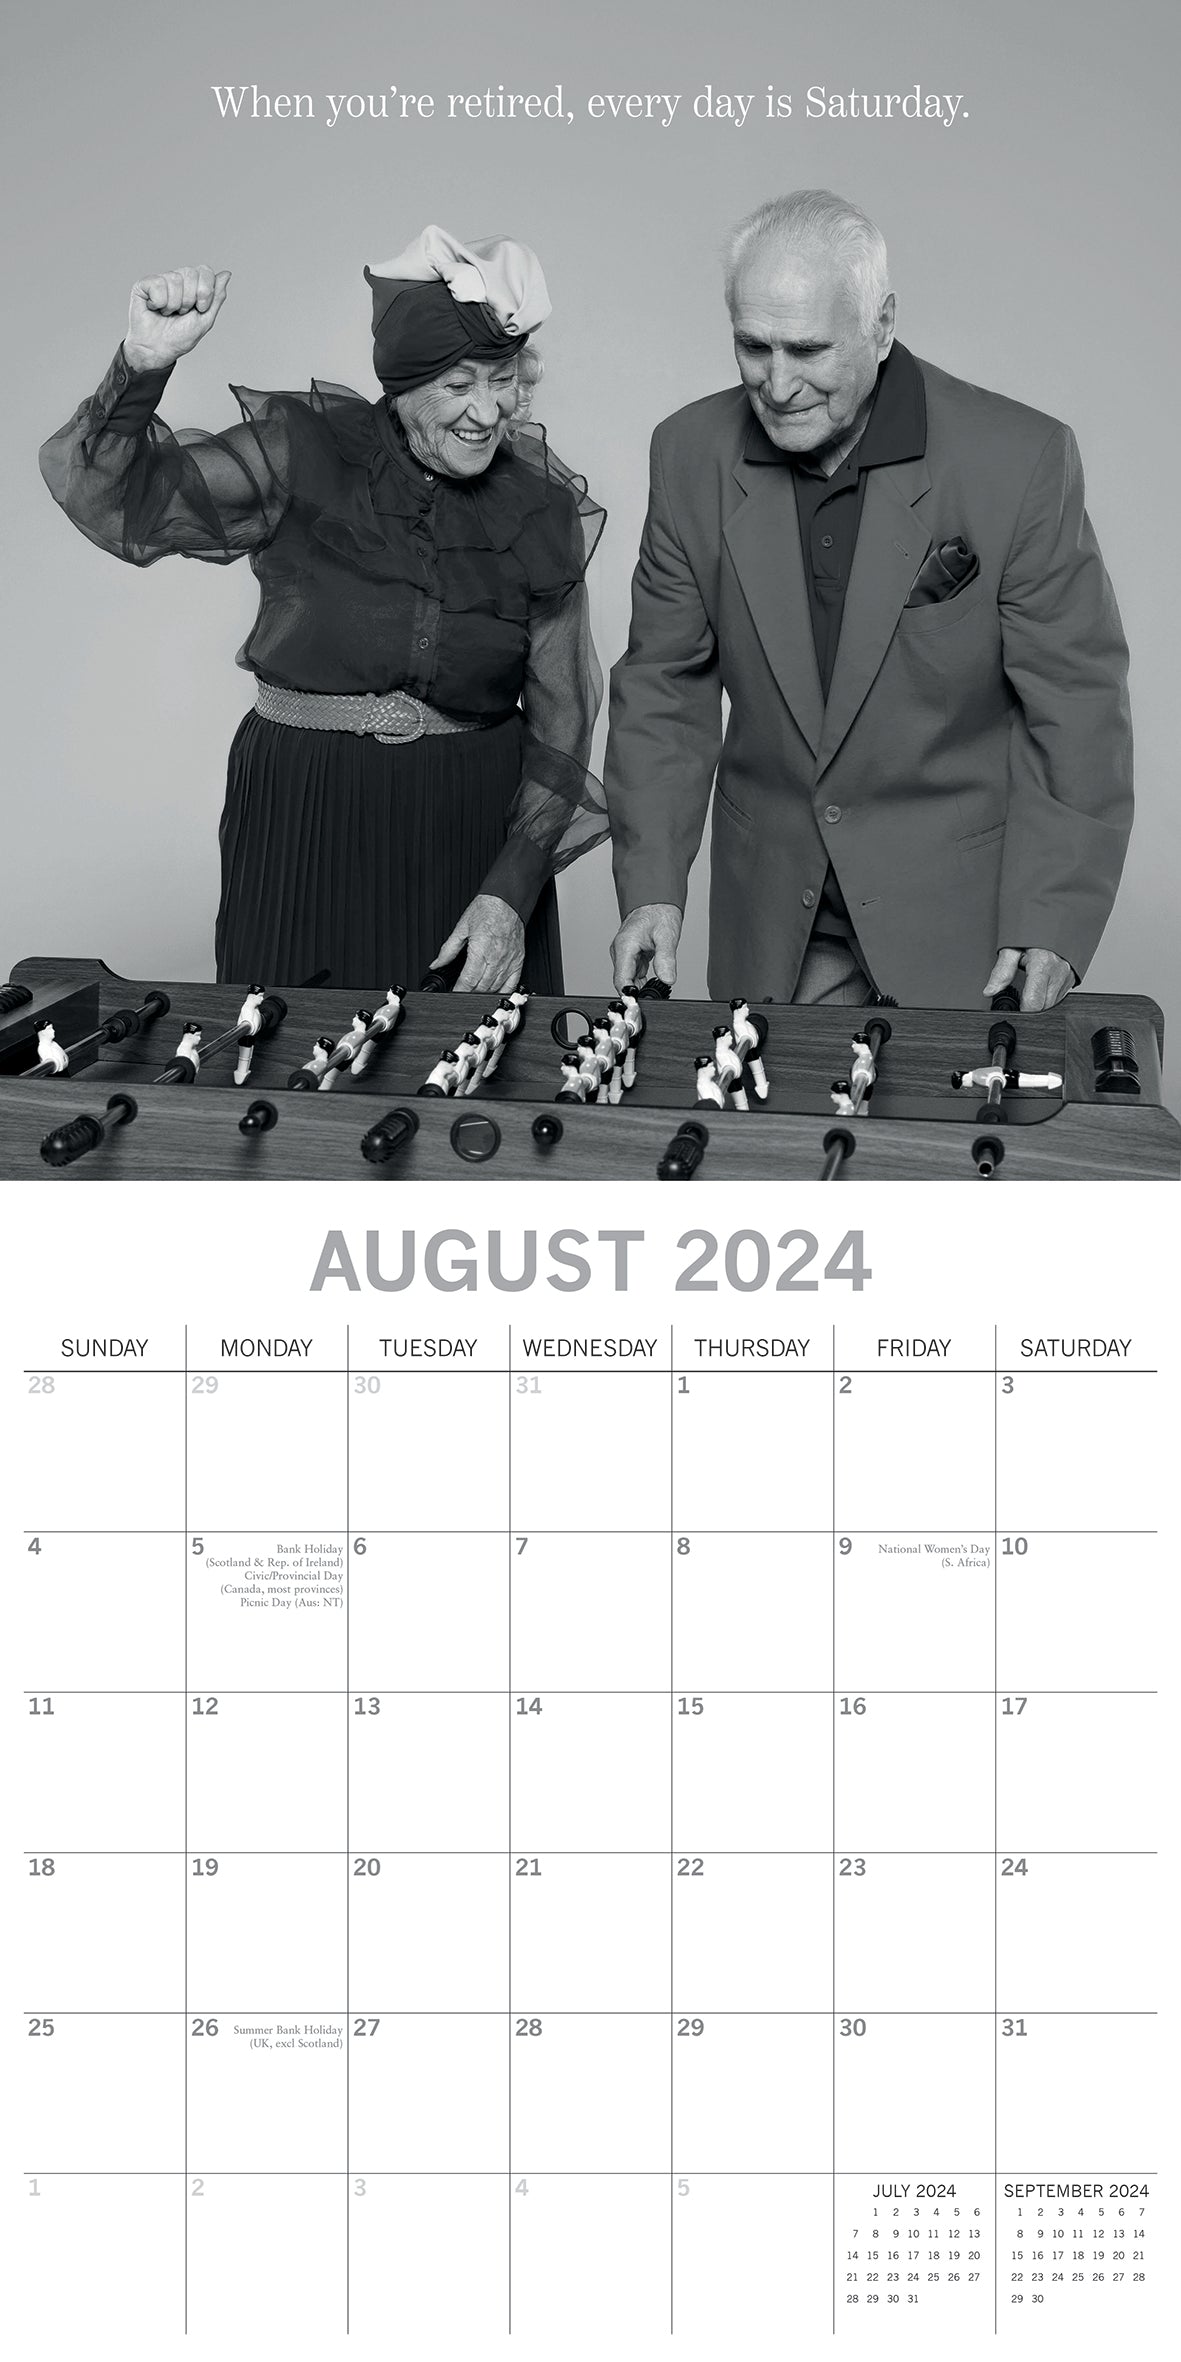 2024 Wrinkly Wit - Square Wall Calendar